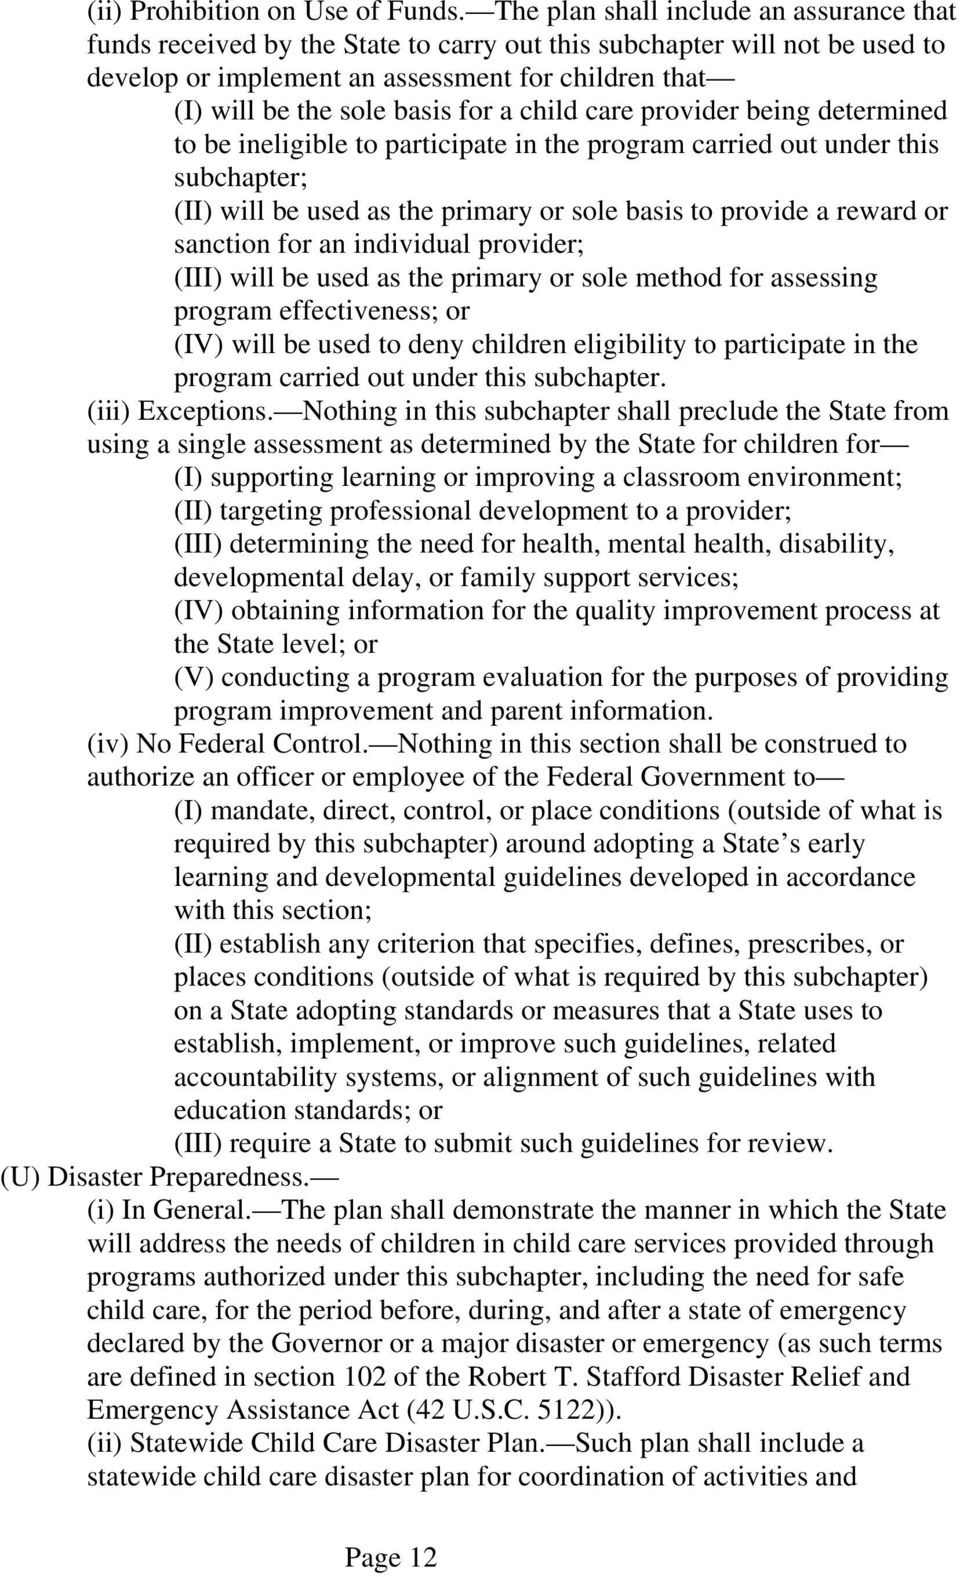 for a child care provider being determined to be ineligible to participate in the program carried out under this subchapter; (II) will be used as the primary or sole basis to provide a reward or